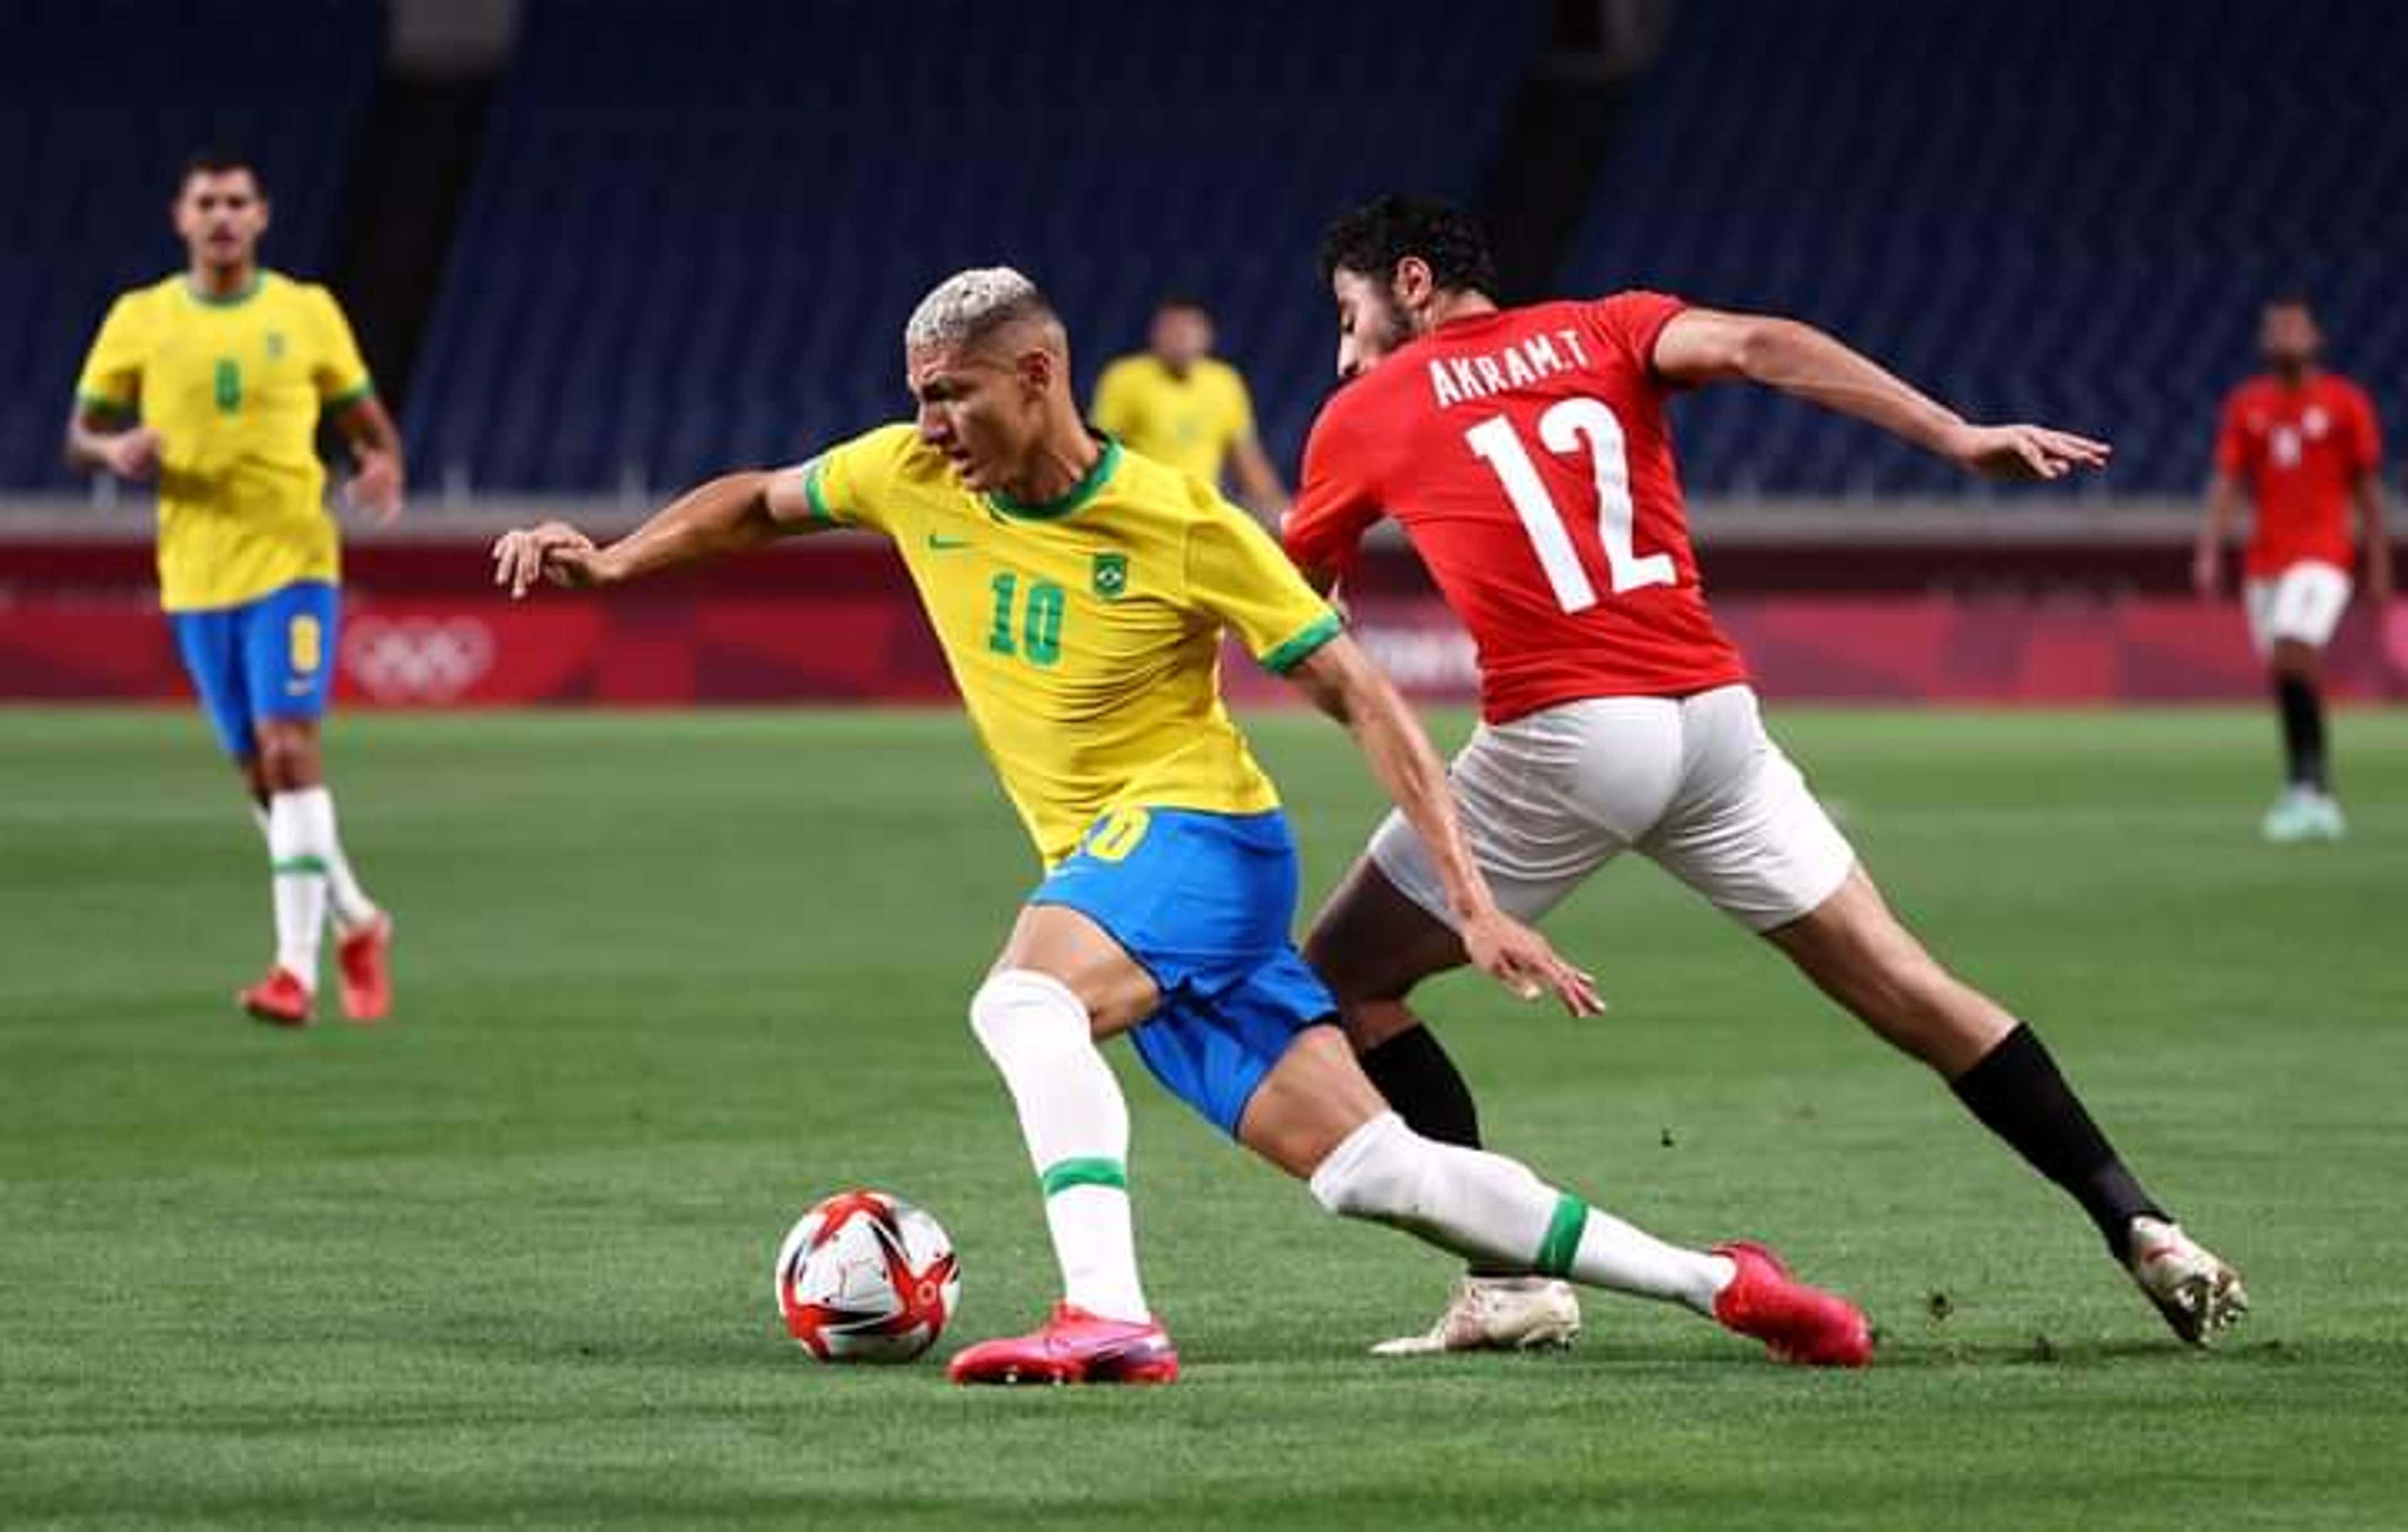 Tokyo, Japan. 31st July, 2021. T'QUIO, TO - 31.07.2021: TOKYO 2020 OLYMPIAD  TOKYO - Paulinho do Brasil during the soccer game between Brazil and Egypt  at the Tokyo 2020 Olympic Games held